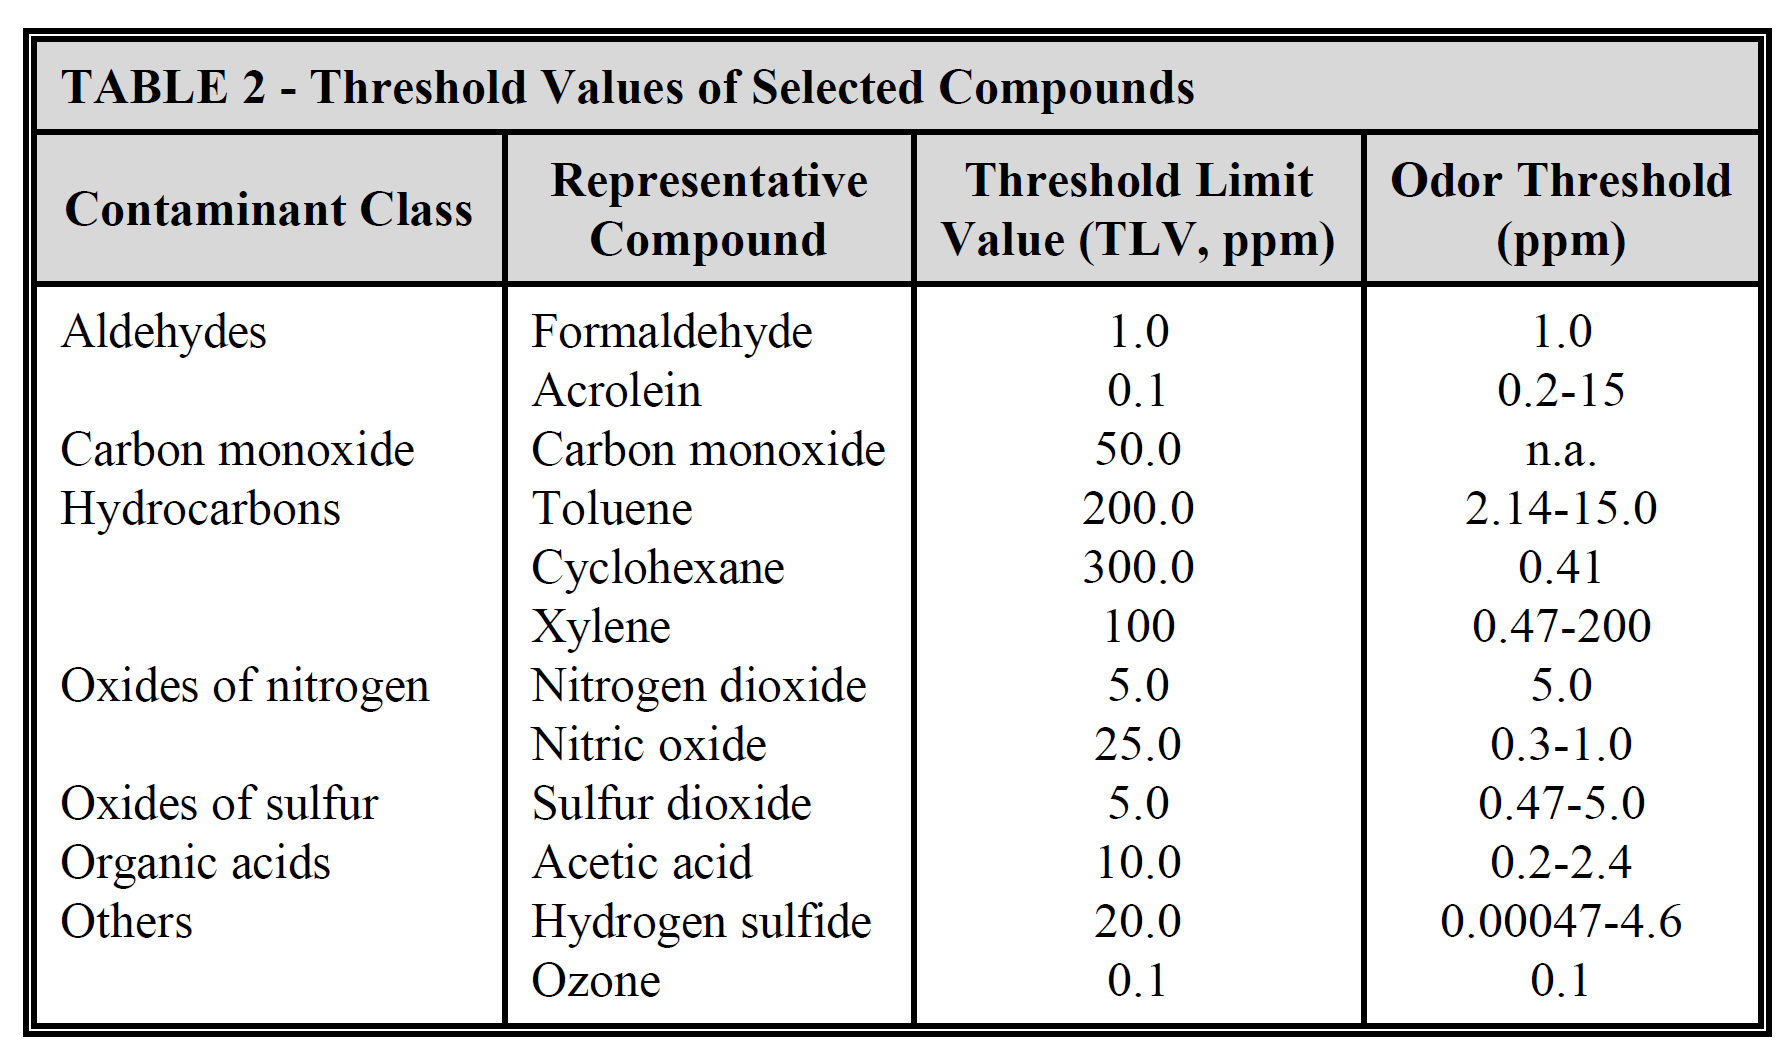 Threshold Values of Selected Compounds